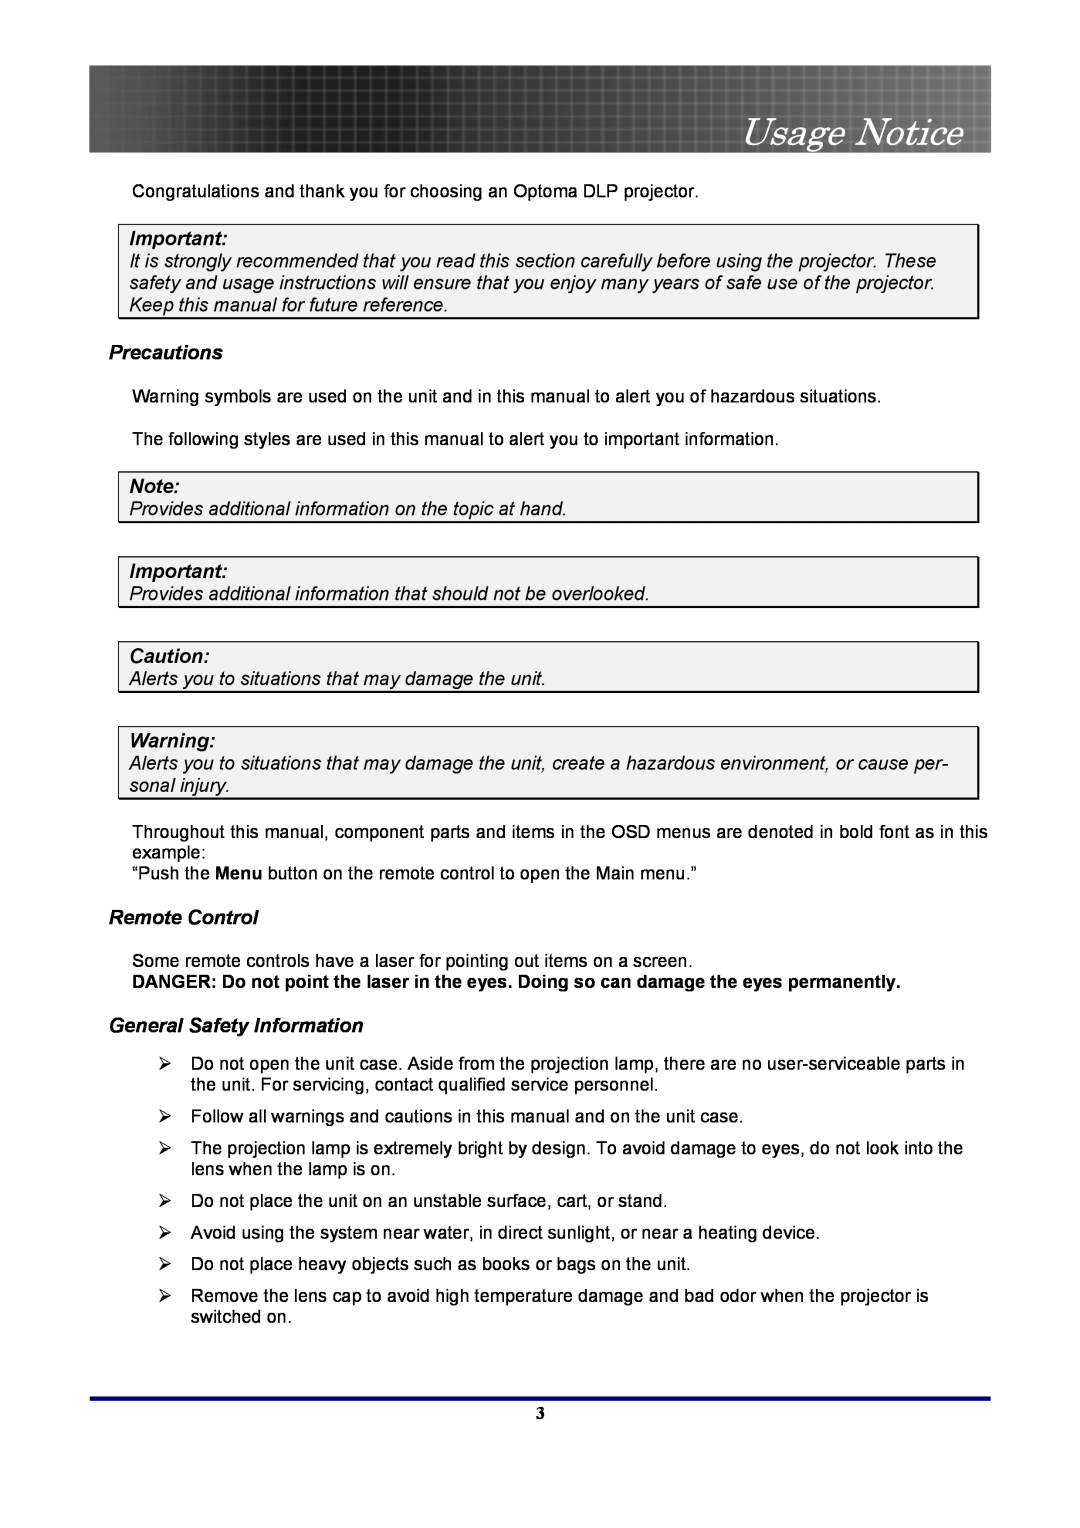 Optoma Technology EP7155 manual Usage Notice, Precautions, Remote Control, General Safety Information 